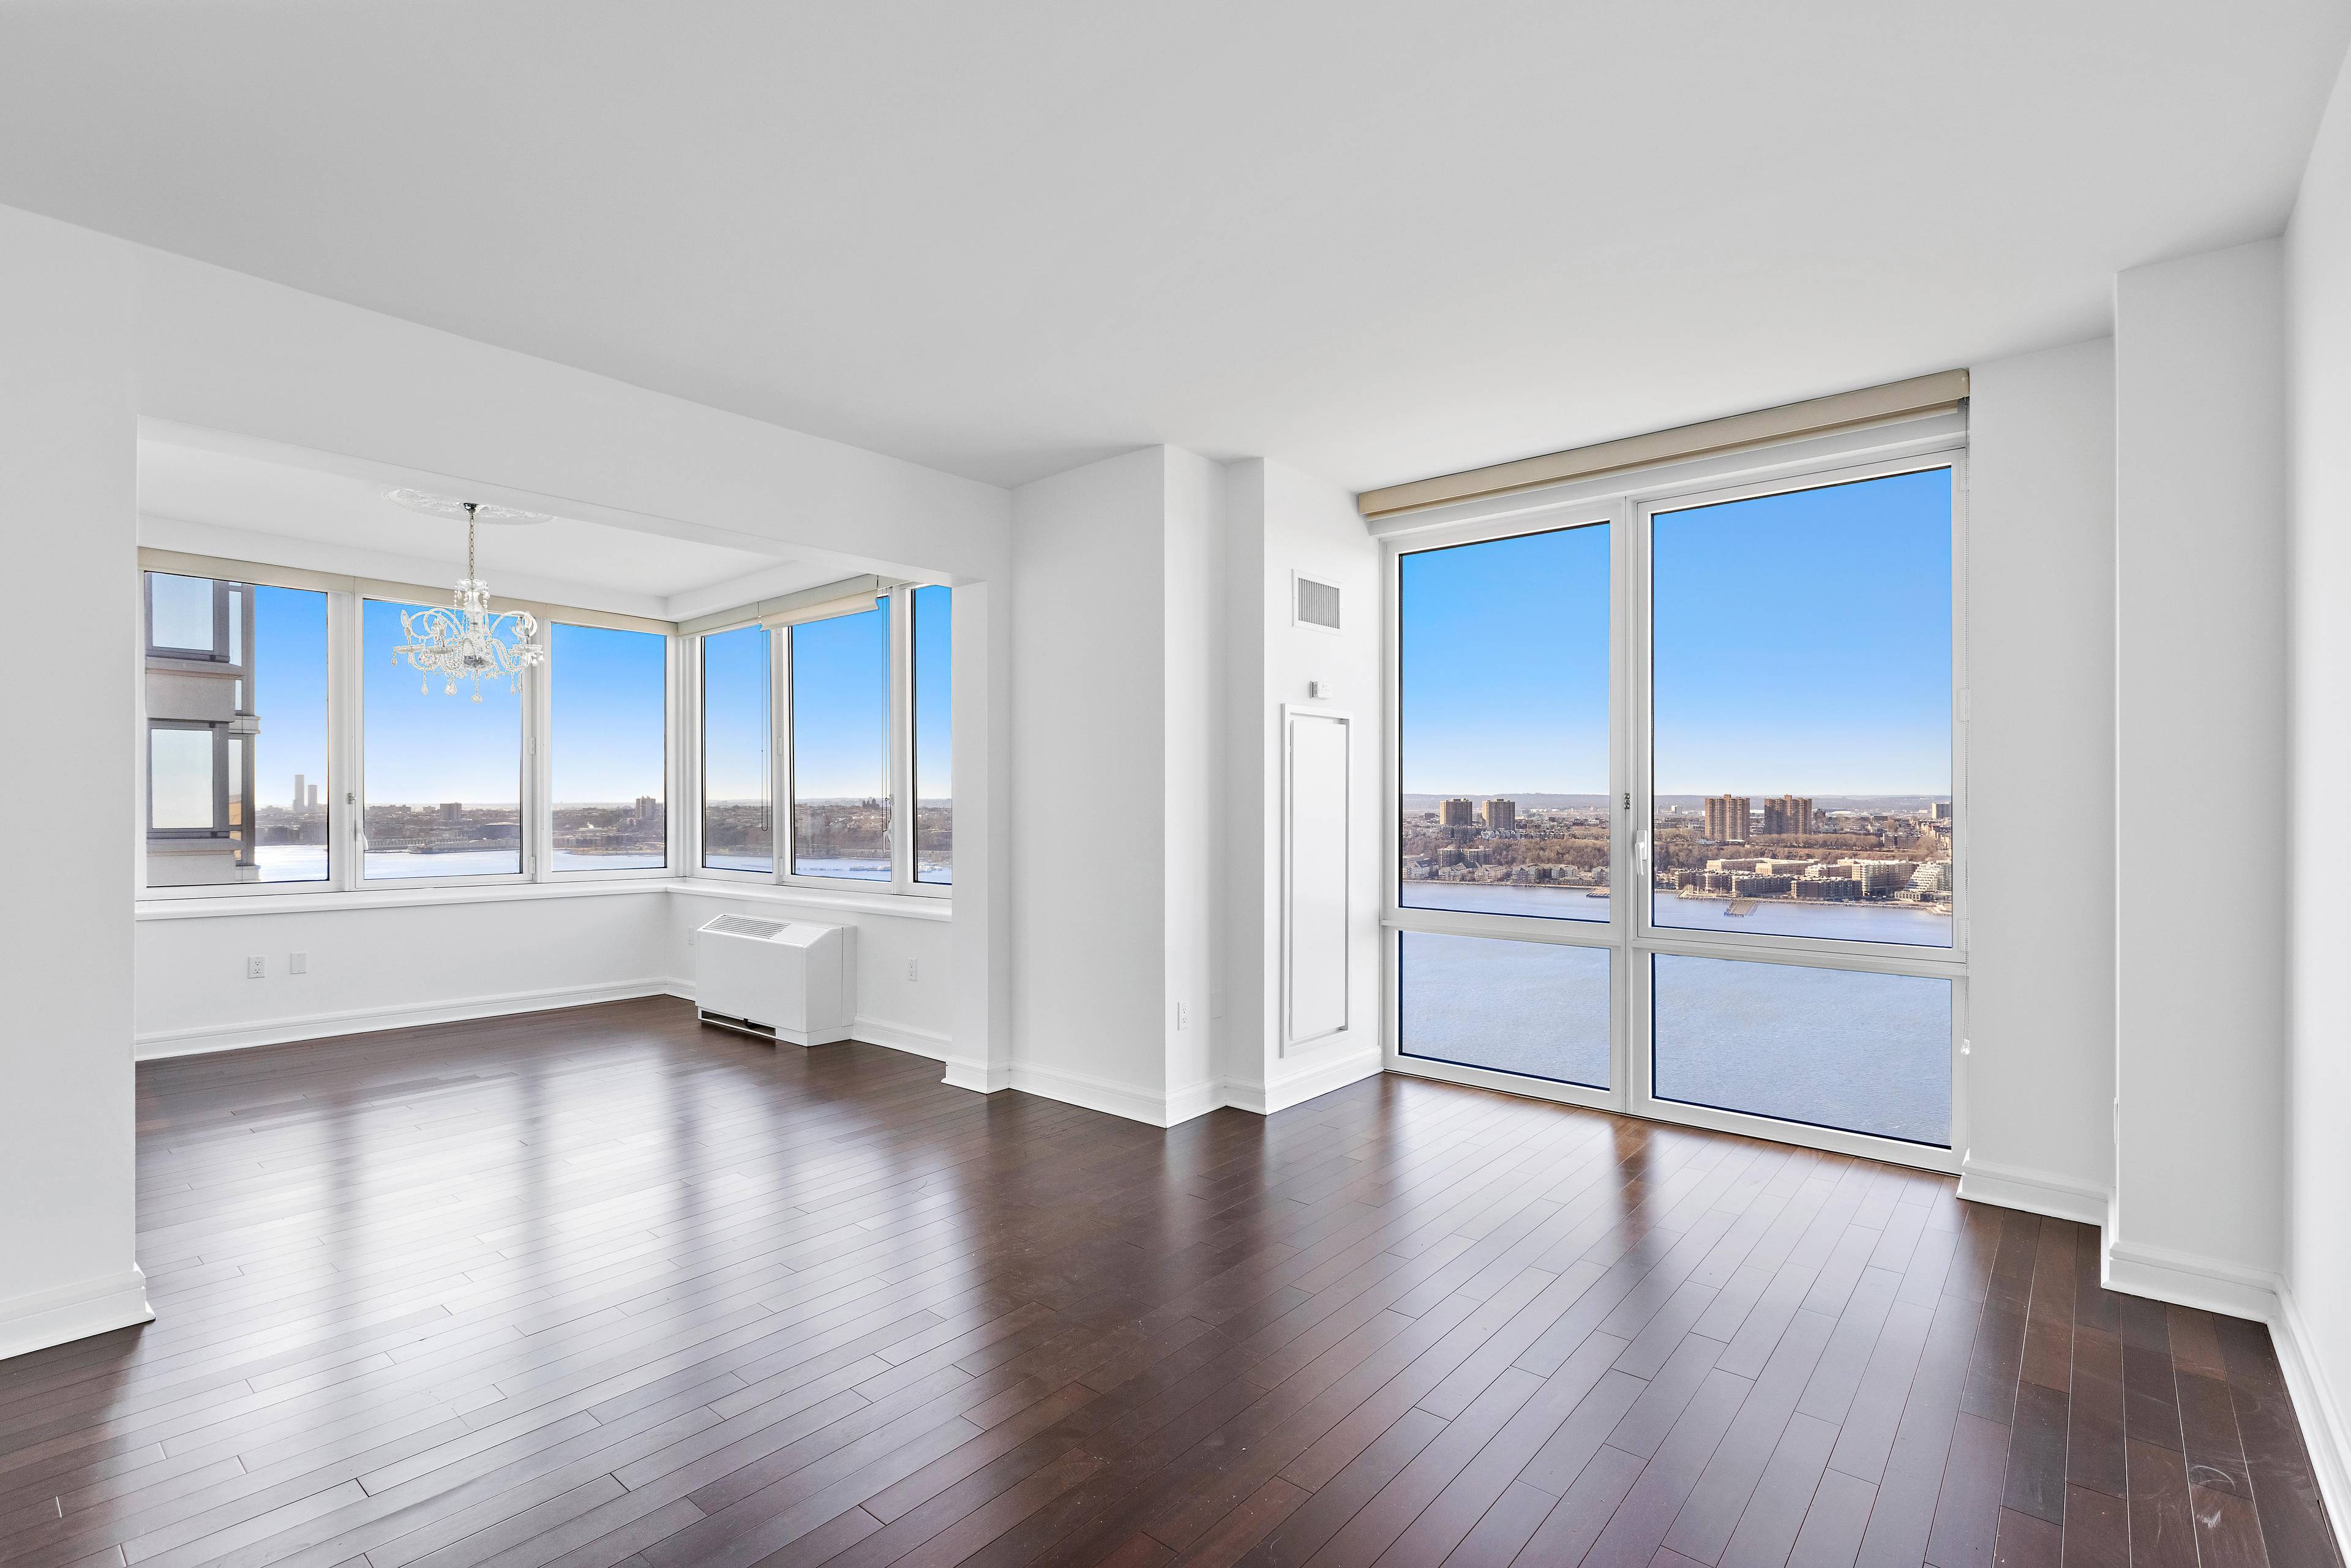 Stunning 3 Bedroom 3 Bathroom Residence with Open Kitchen & fascinating Hudson river & city views!